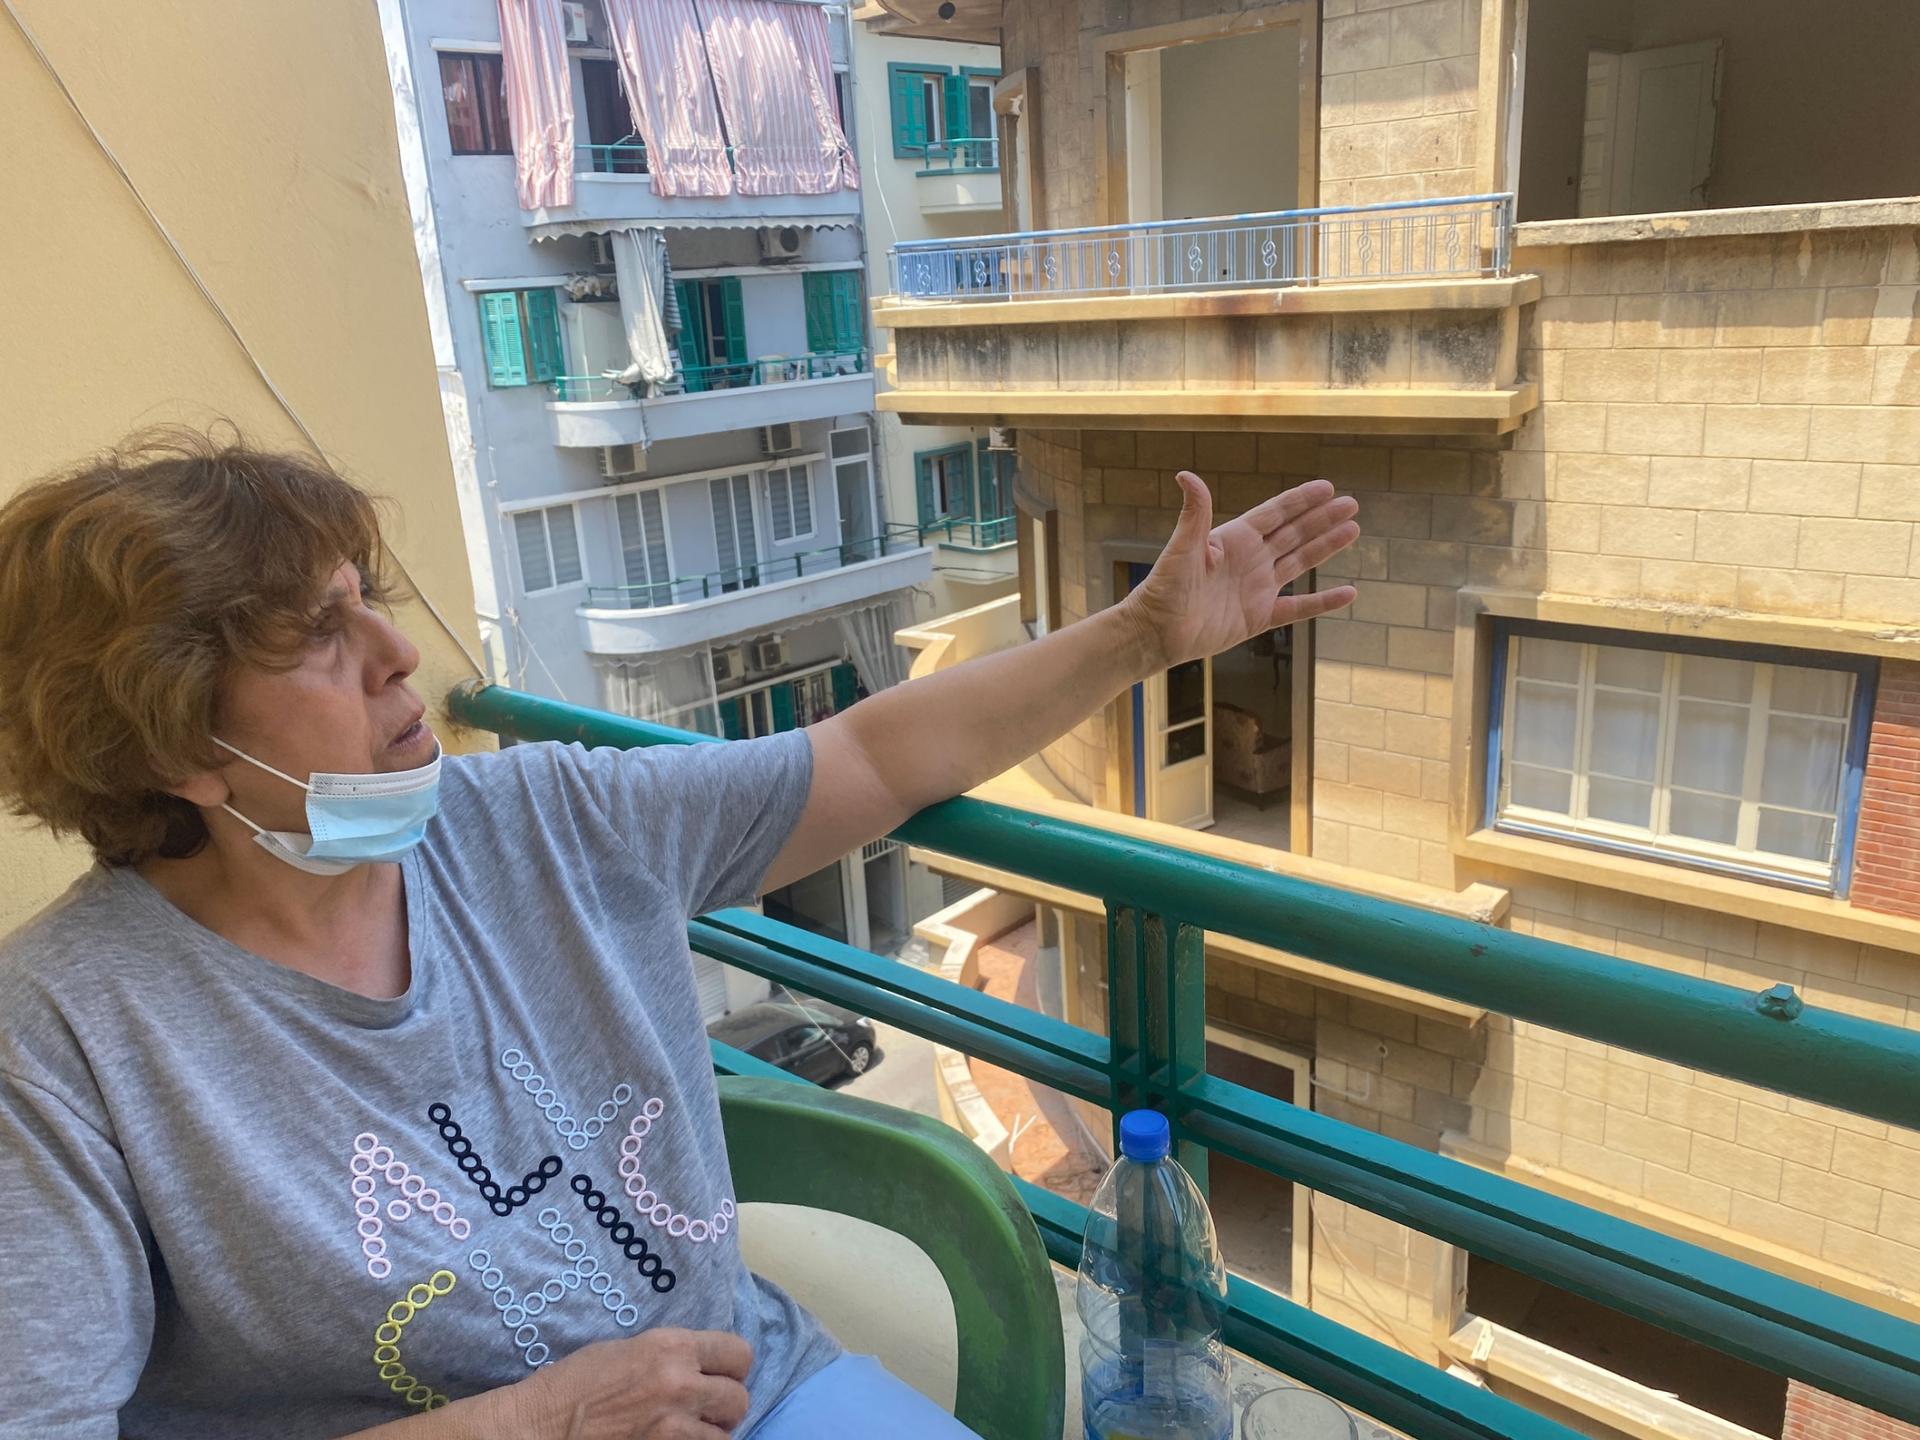 In the days after the blast, Norma Irani refused to leave her windowless, doorless home.